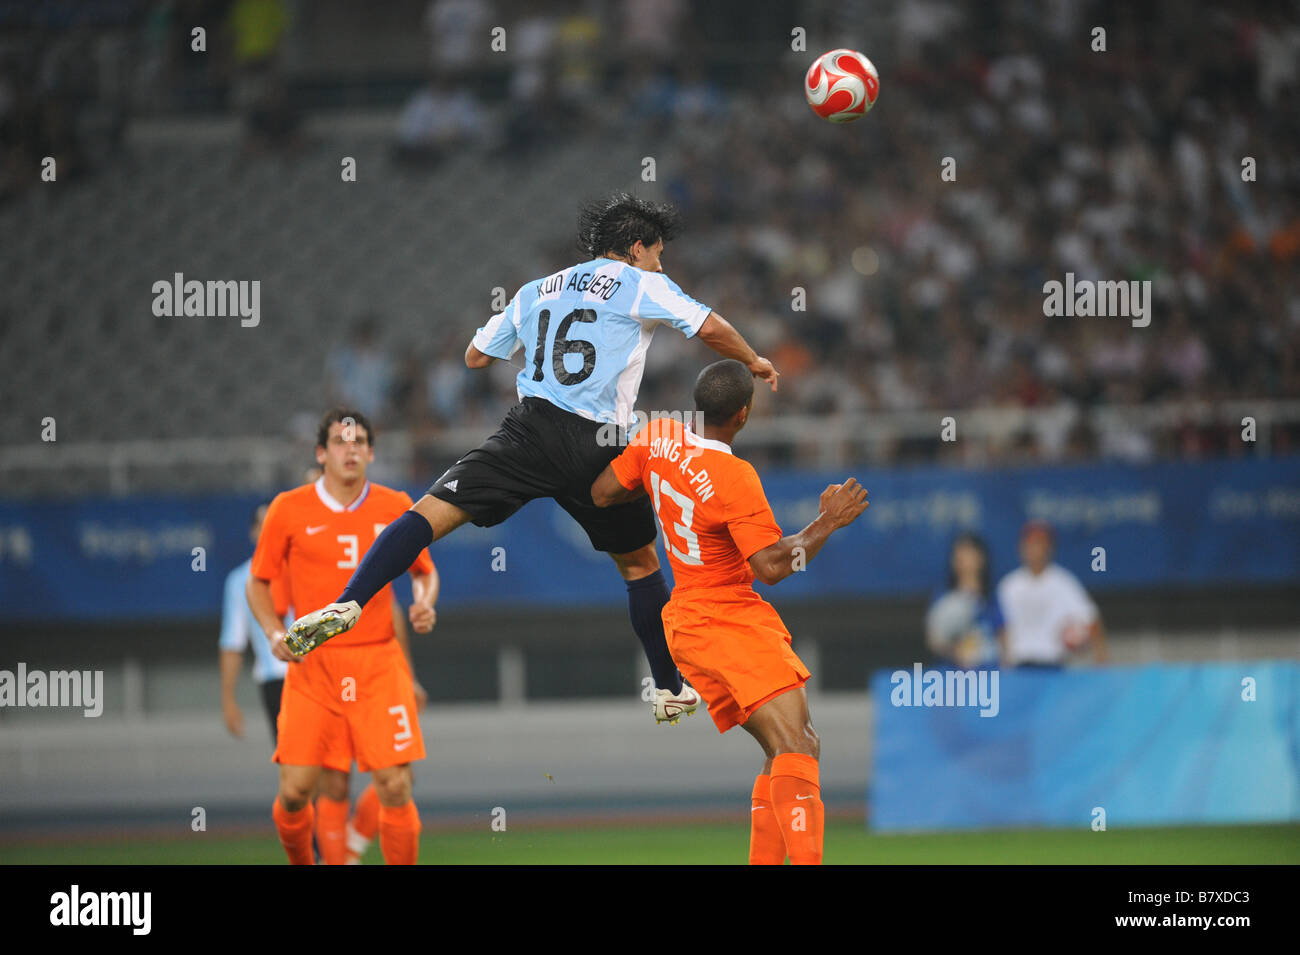 Sergio Aguero ARG AUGUST 16 2008 Football Beijing 2008 Olympic Games Mens Football Quarter Final match between Argentina and Netherlands at Shanghai Stadium in Shanghai China Photo by Atsushi Tomura AFLO SPORT 1035 Stock Photo